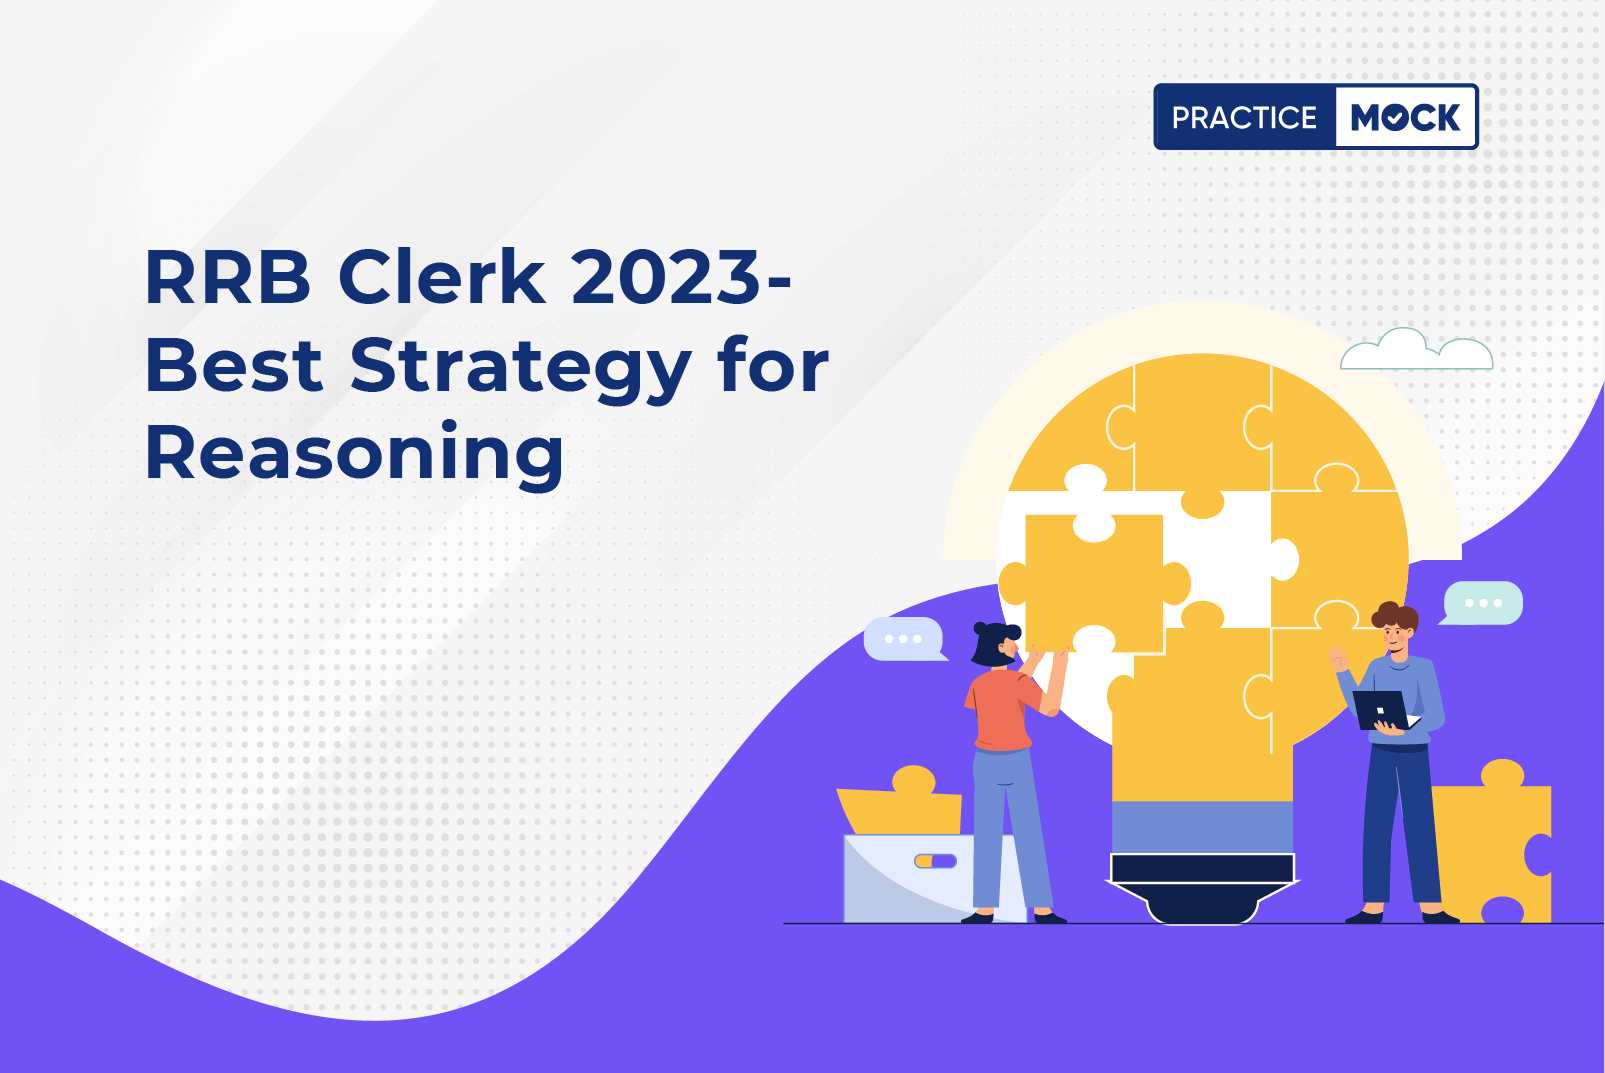 RRB Clerk - The Best Strategy for Reasoning